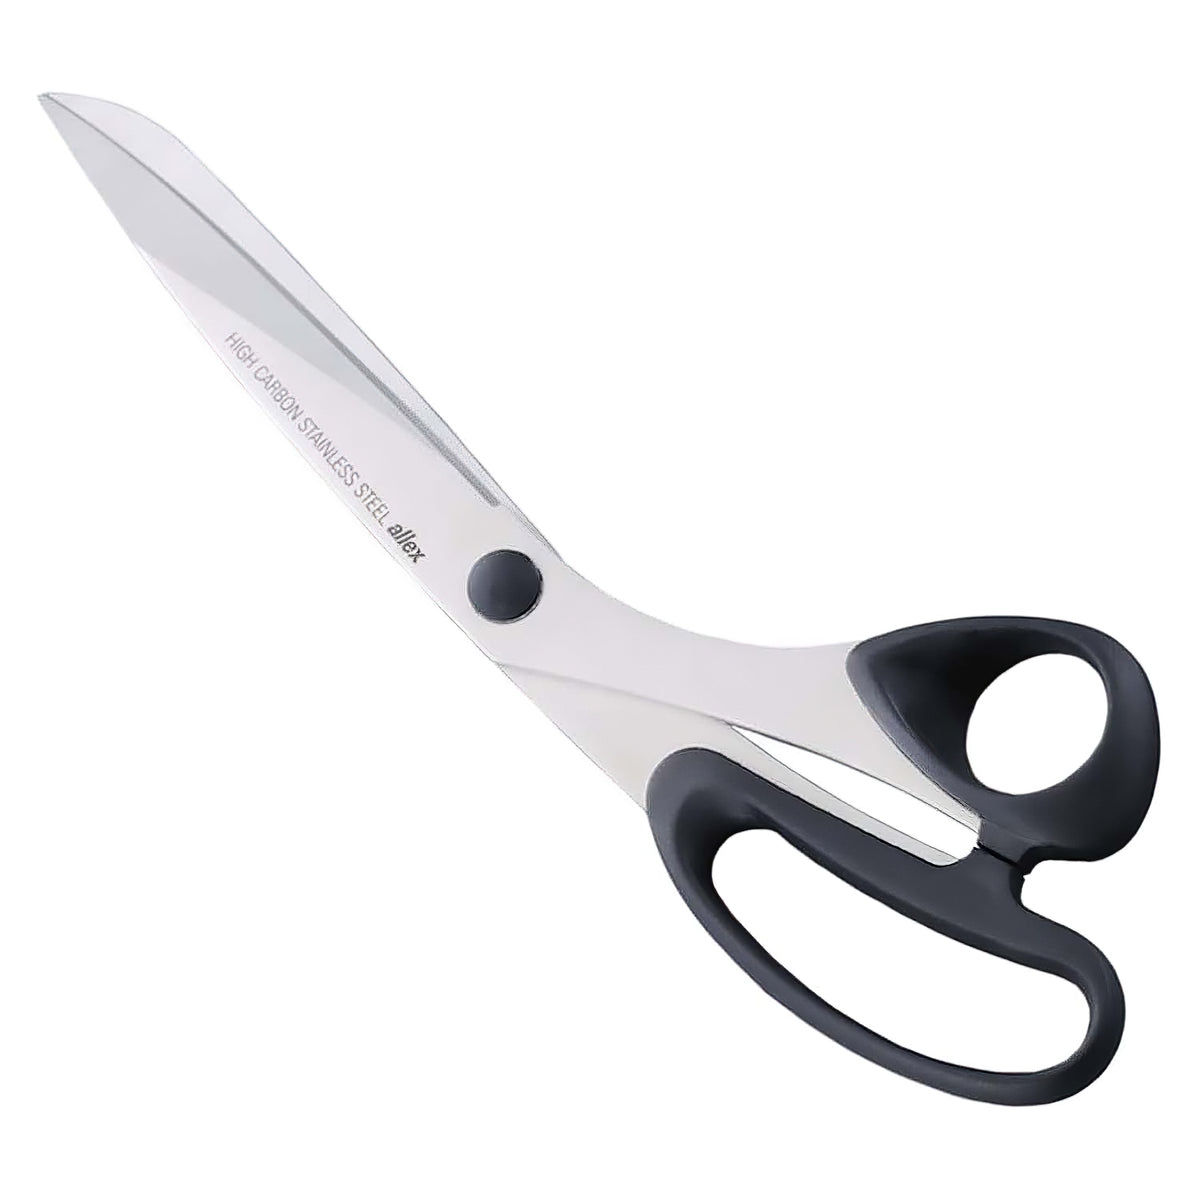 ALLEX High Carbon Stainless Steel Sewing Scissors